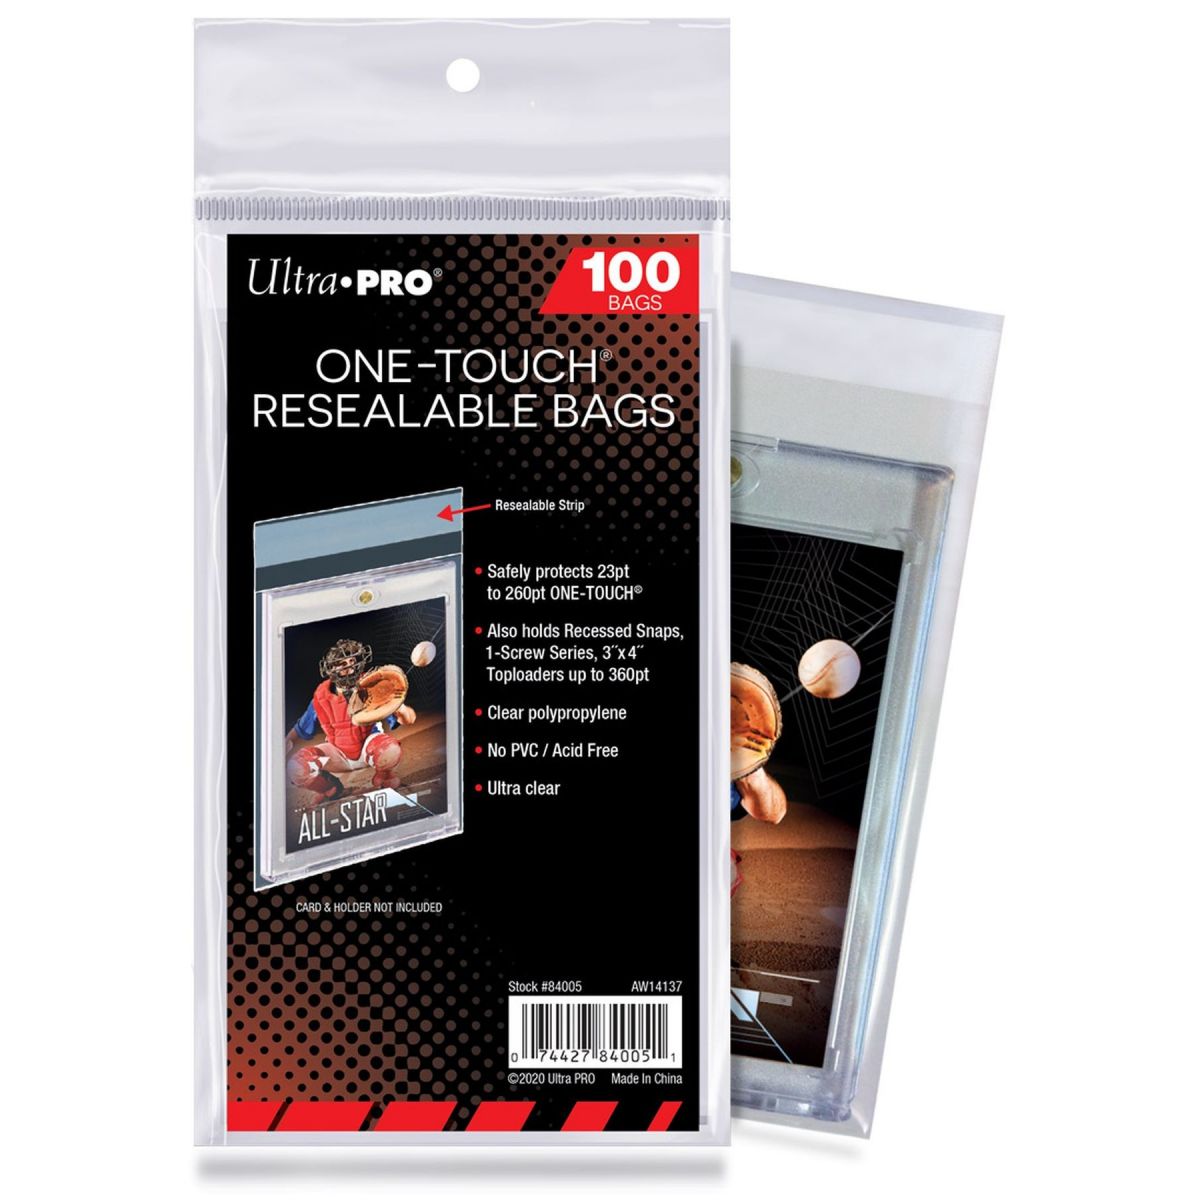 Ultra Pro - Team Bags - One-Touch Resealable Bag - One-Touch Resealable Card Protectors (100)